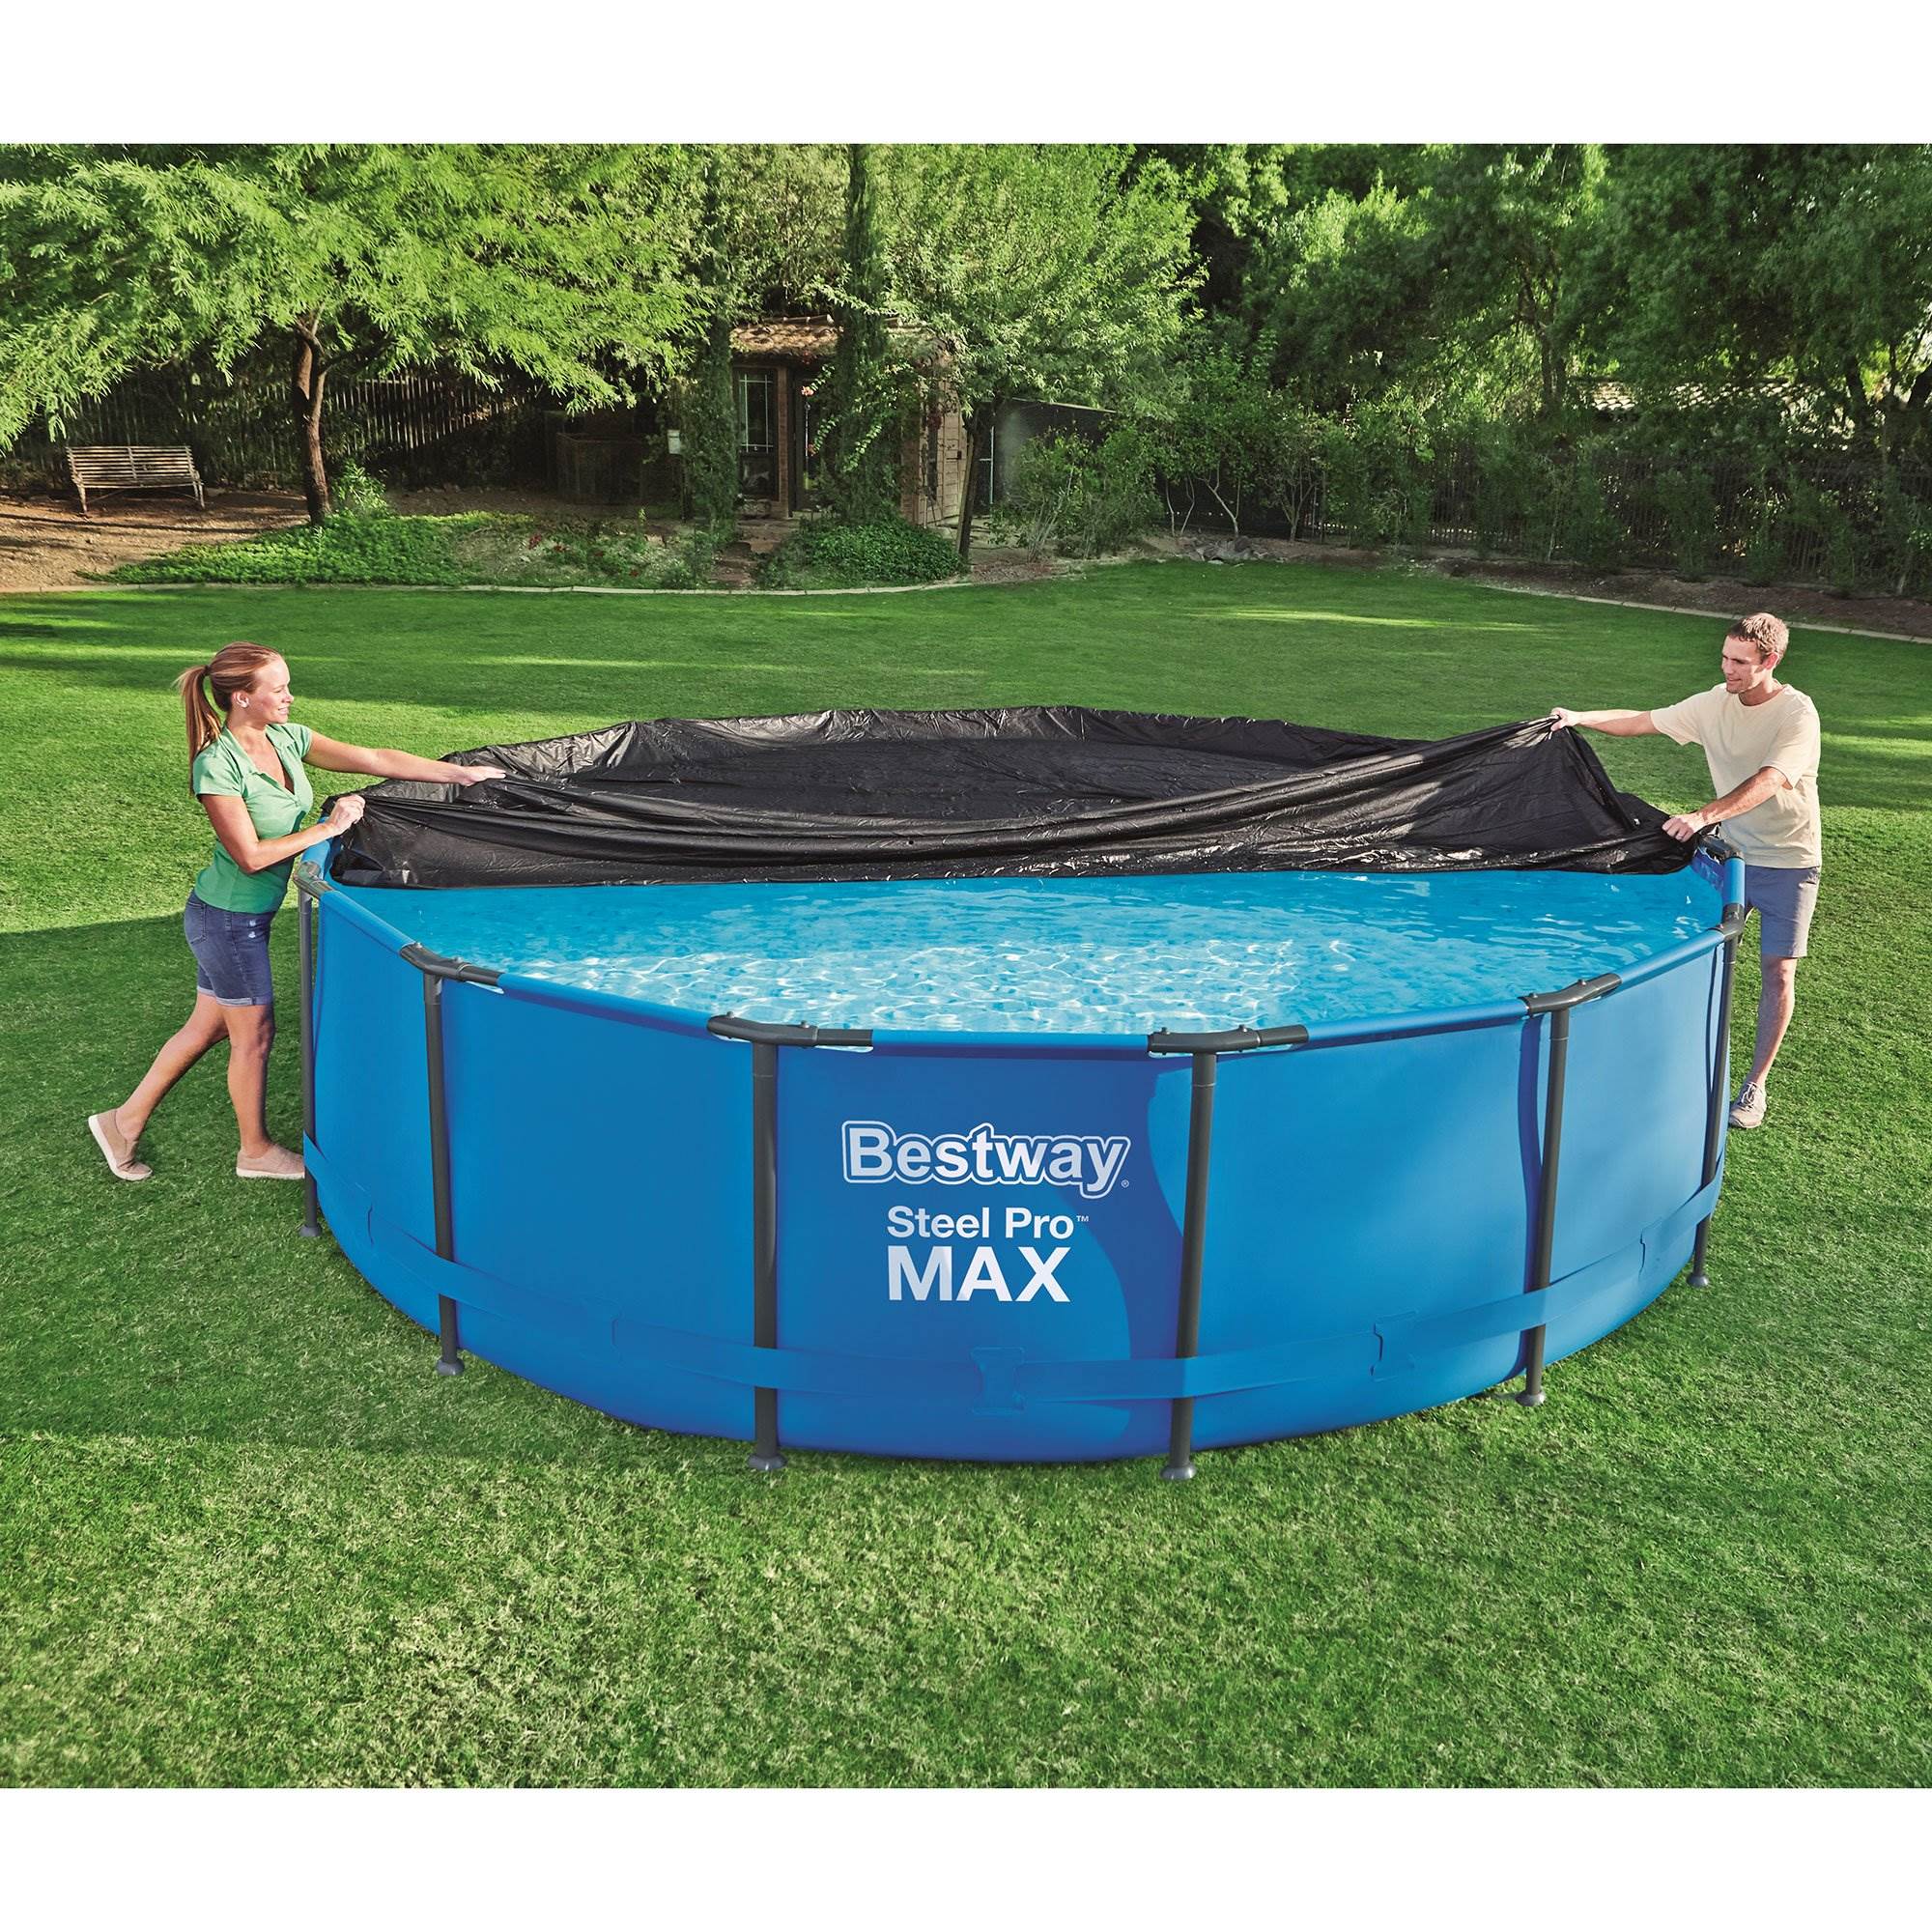 Bestway Flowclear 15 Foot Above Ground Round Frame Swimming Pool Cover (Used) 821808006182 eBay